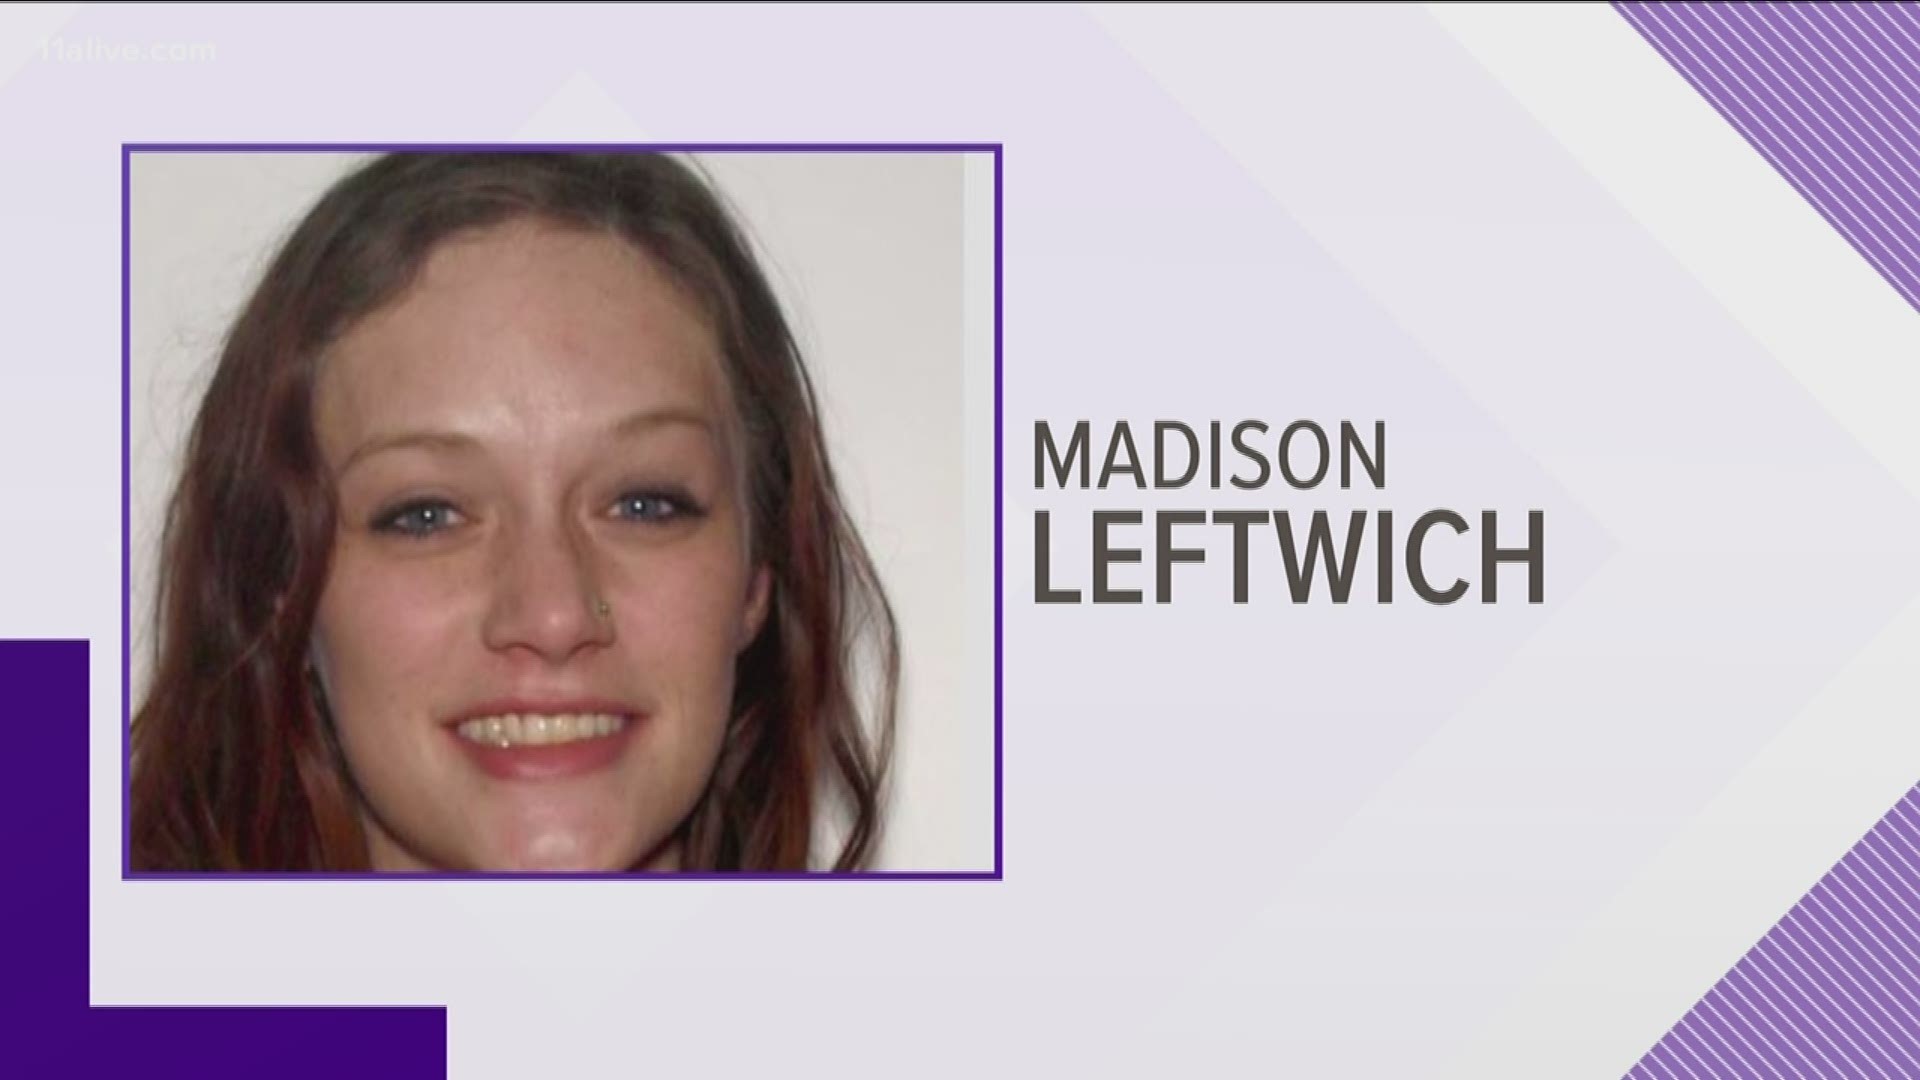 Police confirmed they found the vehicle in question at a nearby apartment complex and arrested a 25-year-old Atlanta woman, Madison Kelley Leftwich.